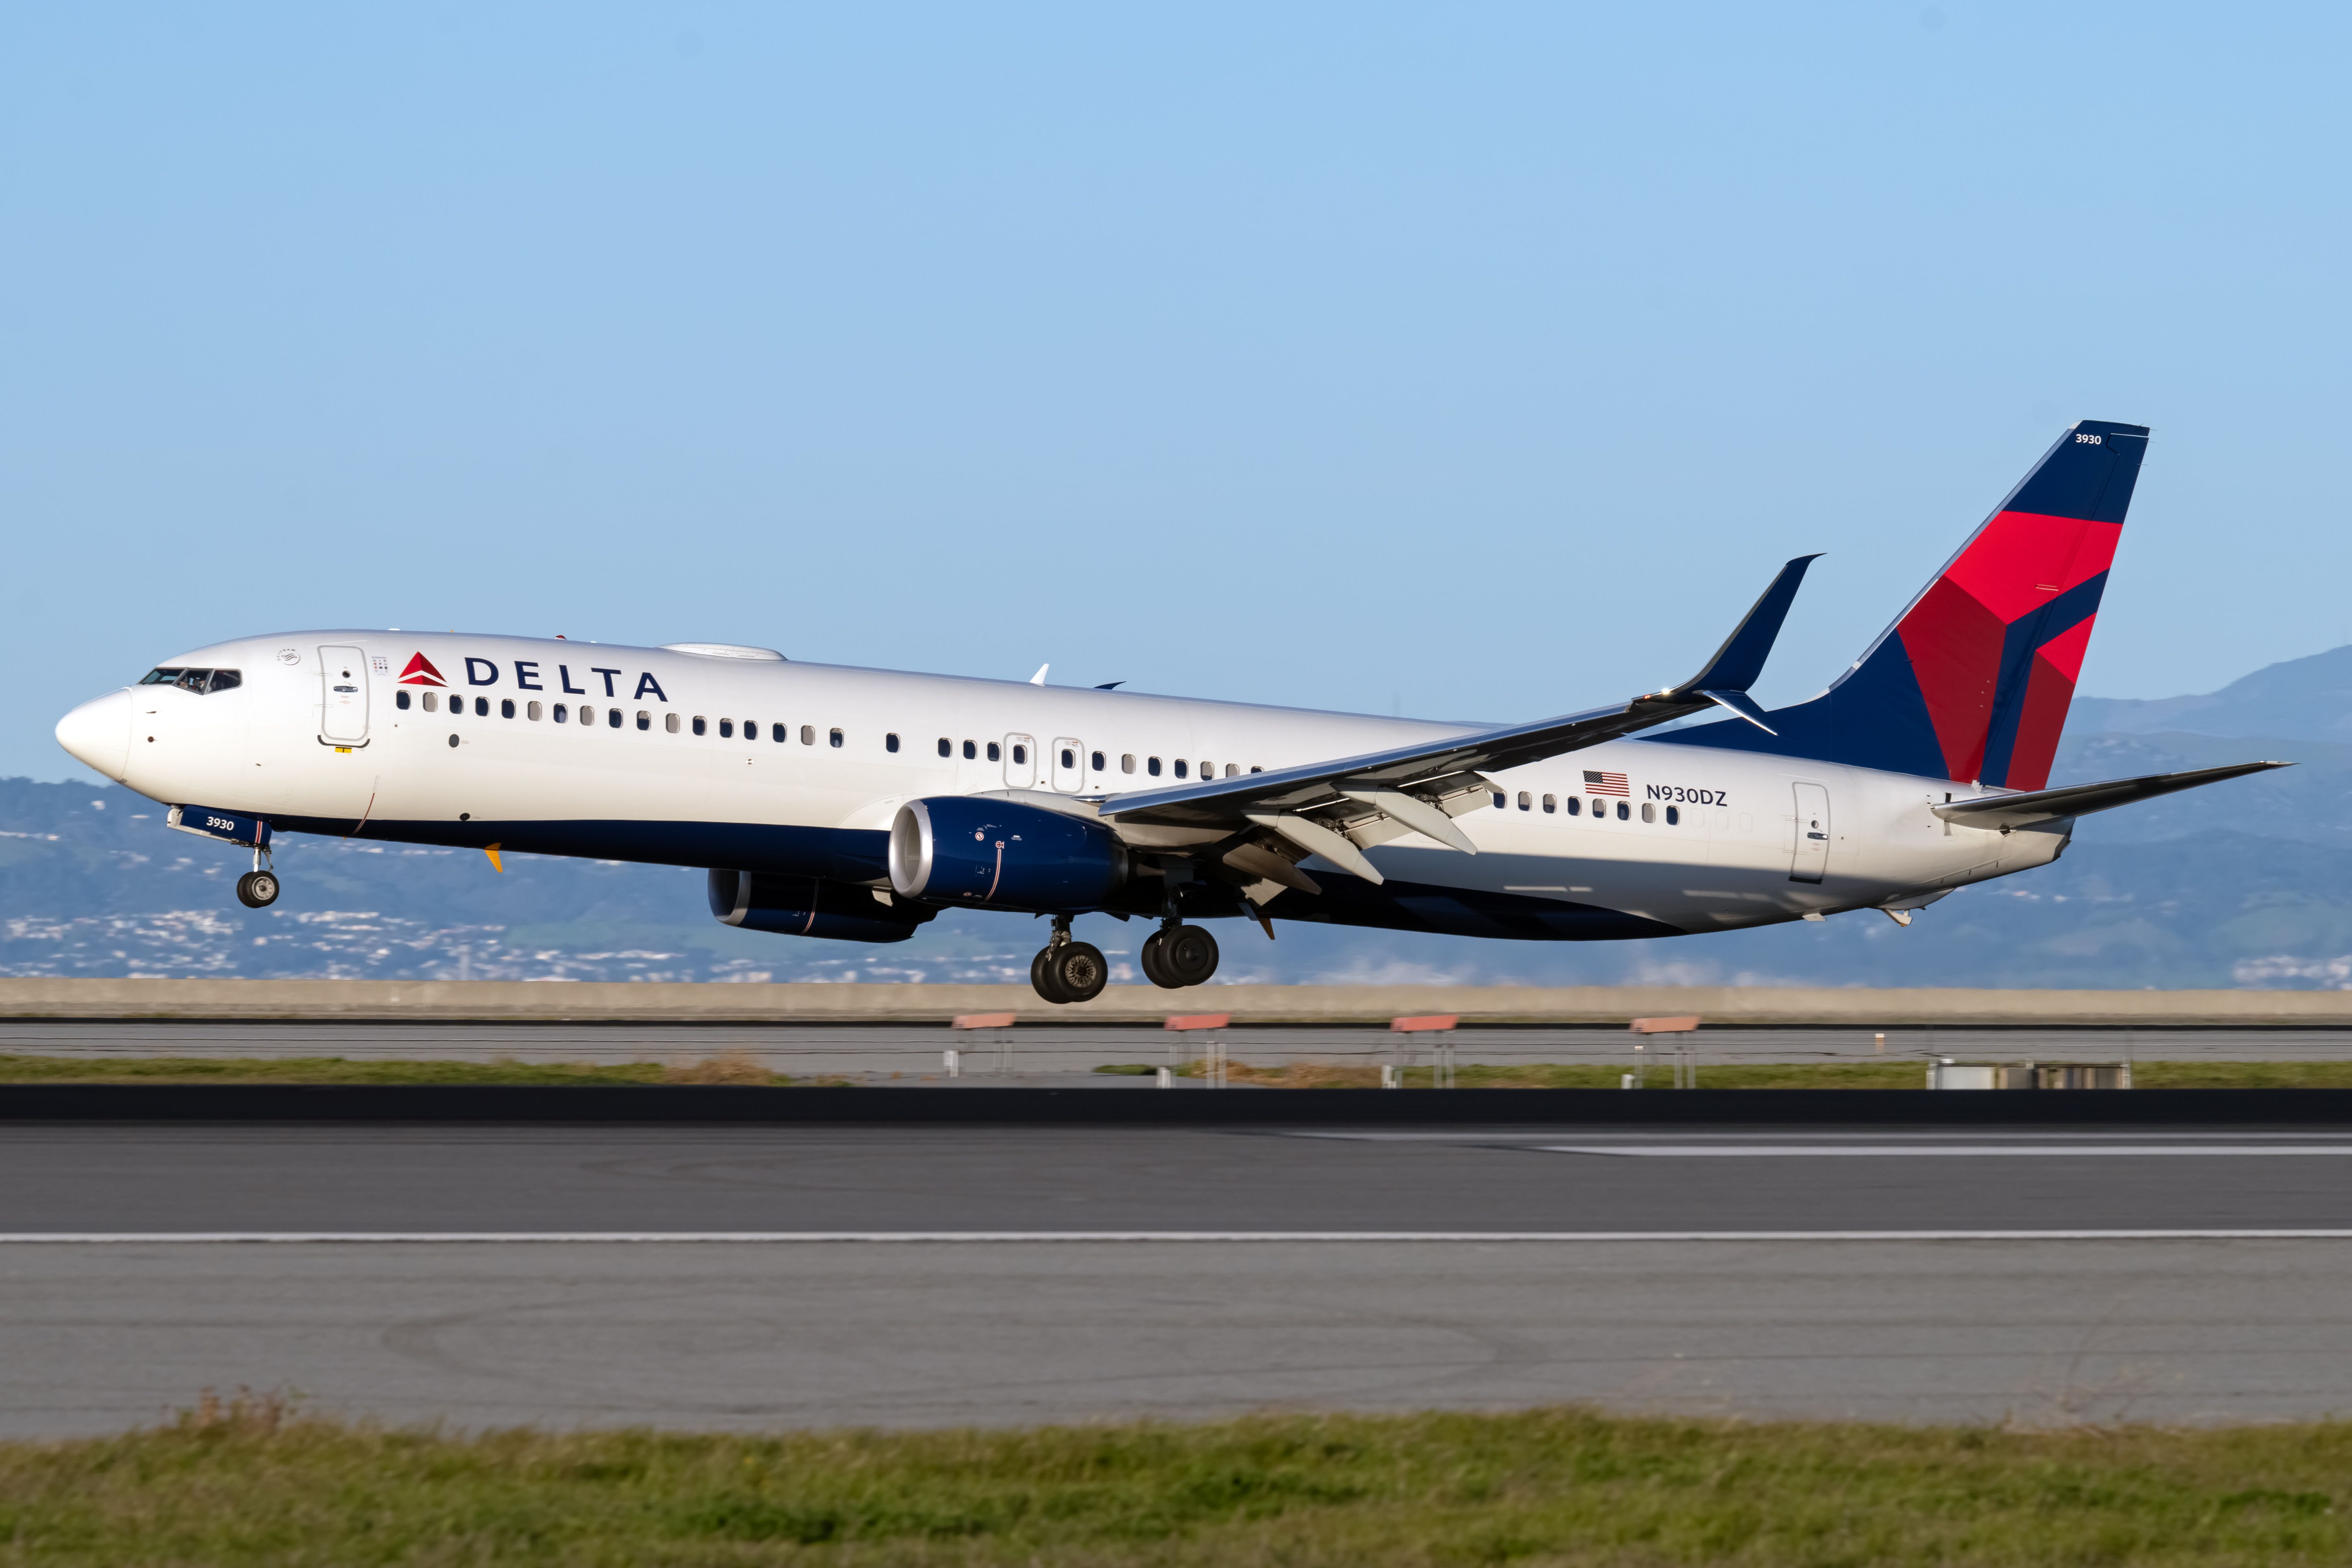 Delta Air Lines' SkyMiles Program: What Are The Hidden Perks?